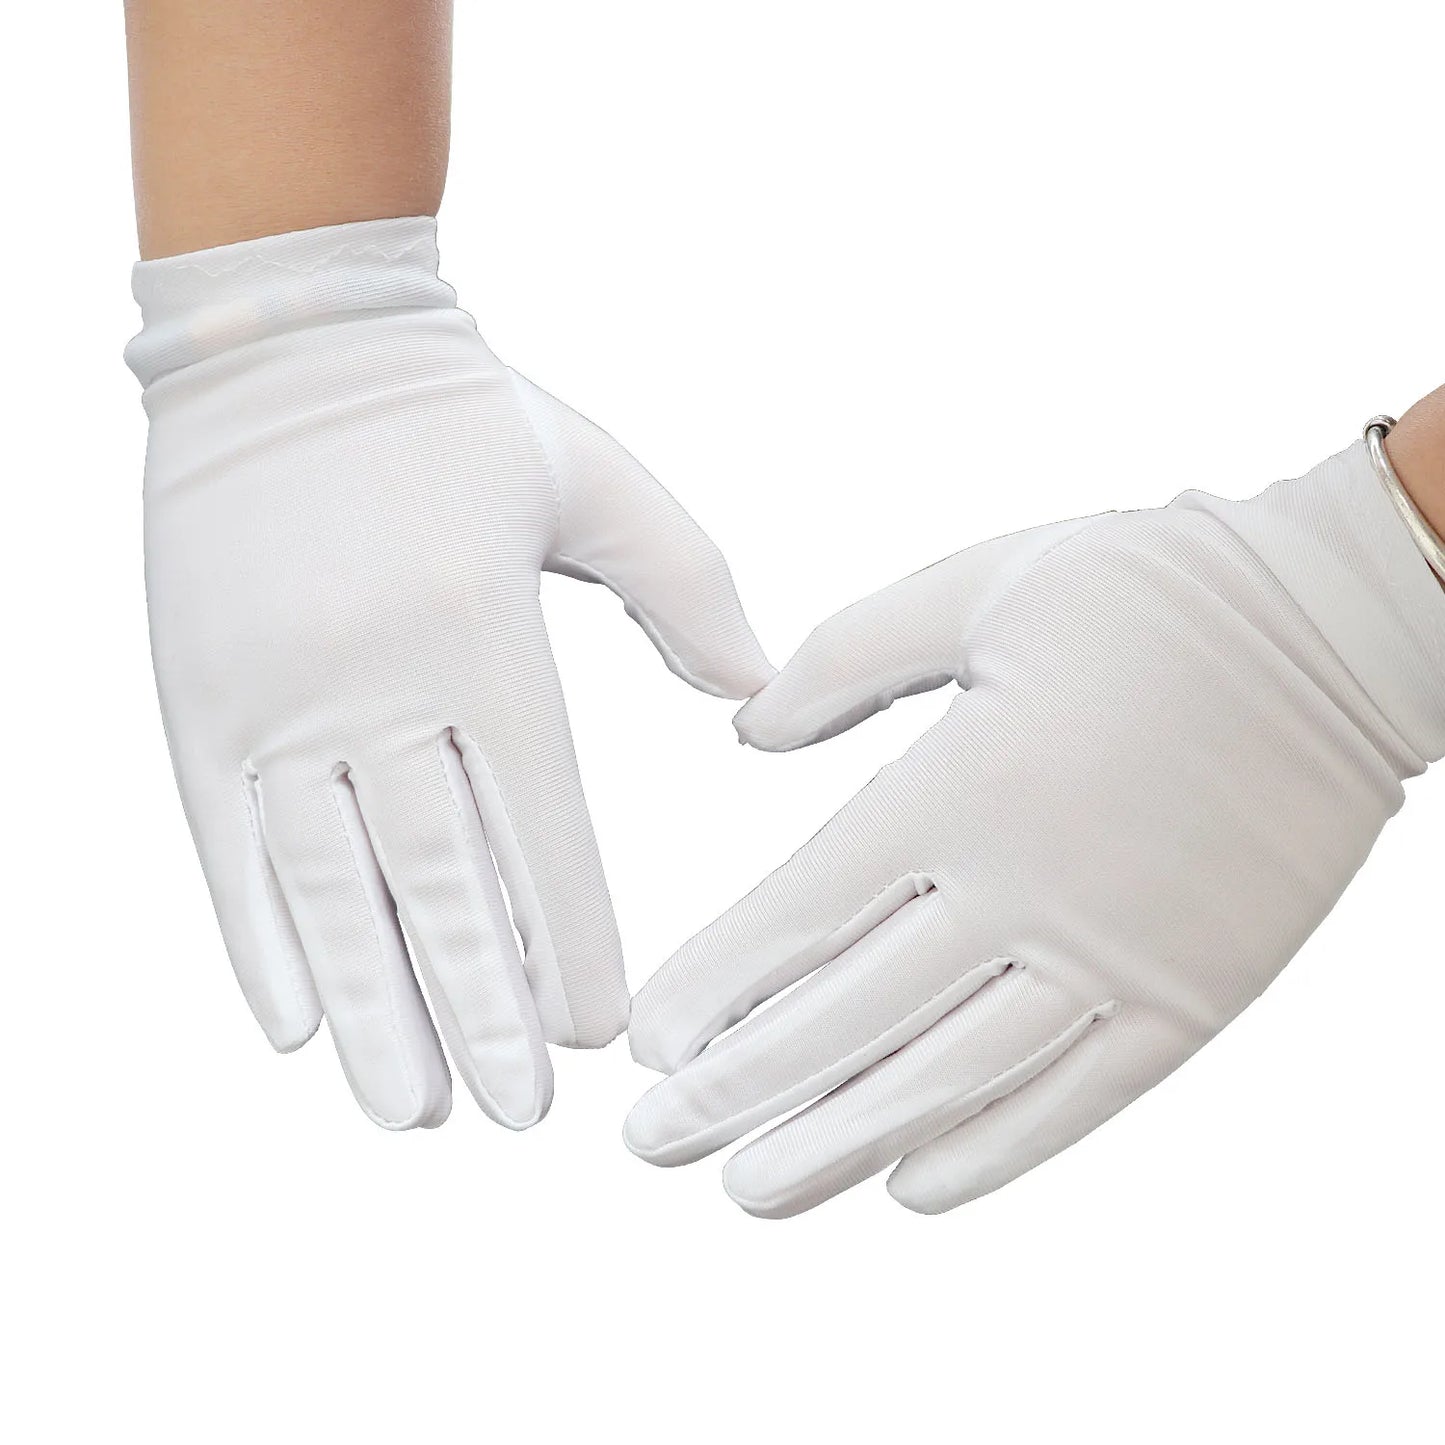 Premium 12 Pairs Cotton Gloves – Perfect for Cleaning, Serving & Moisturizing Dry Hands"